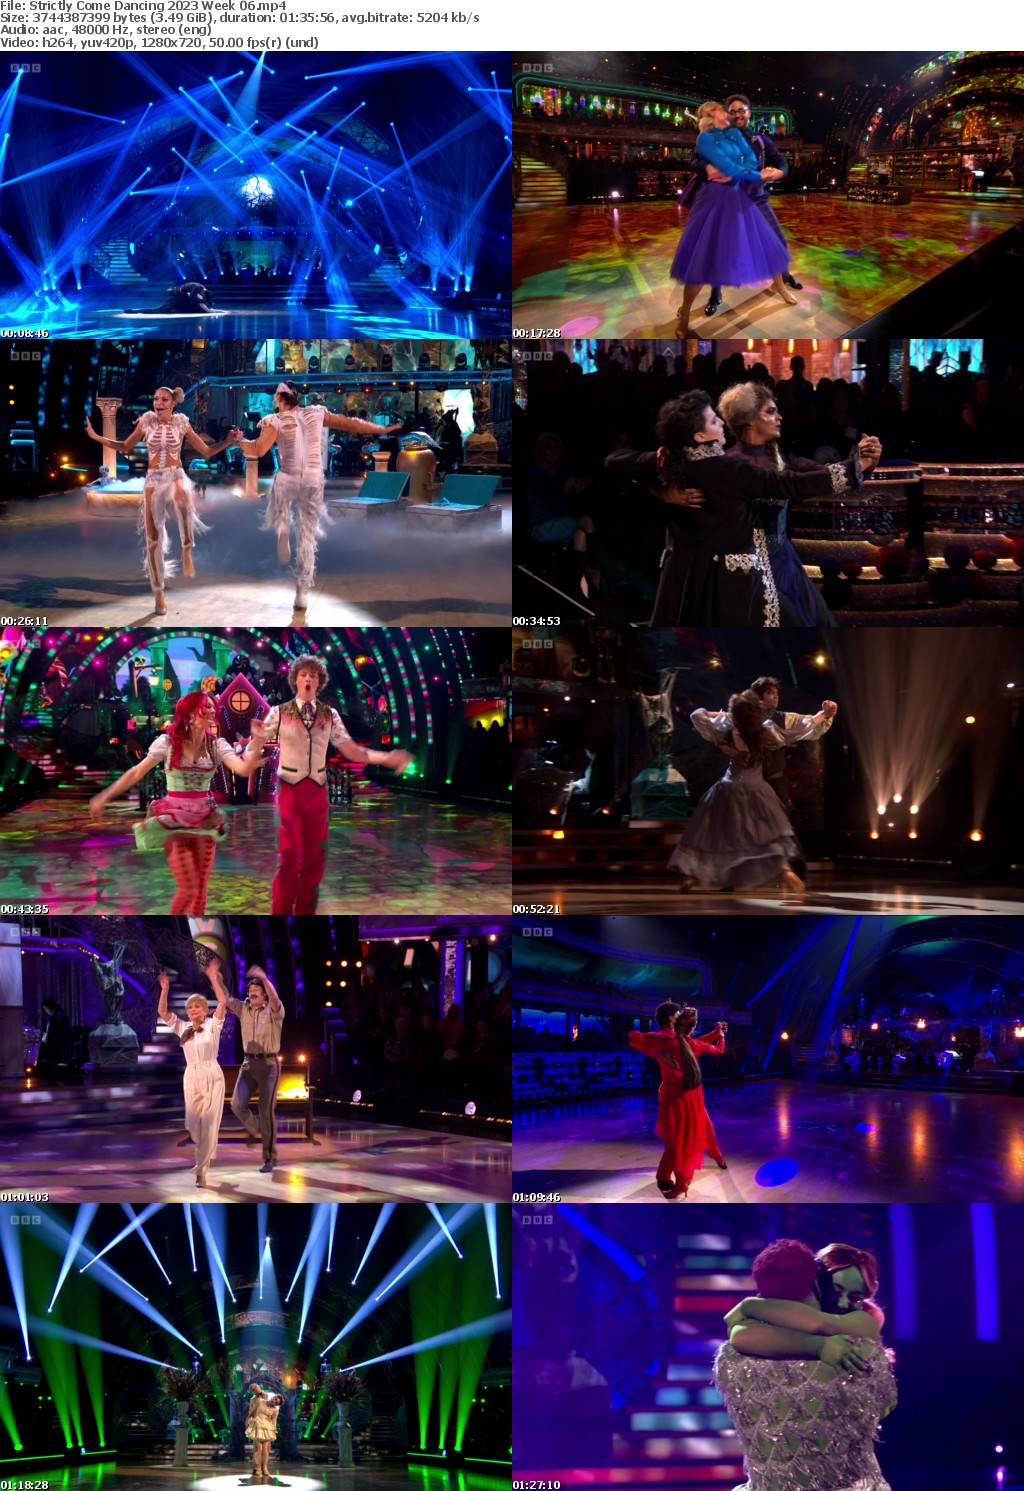 Strictly Come Dancing 2023 Week 06 (1280x720p HD, 50fps, soft Eng subs)